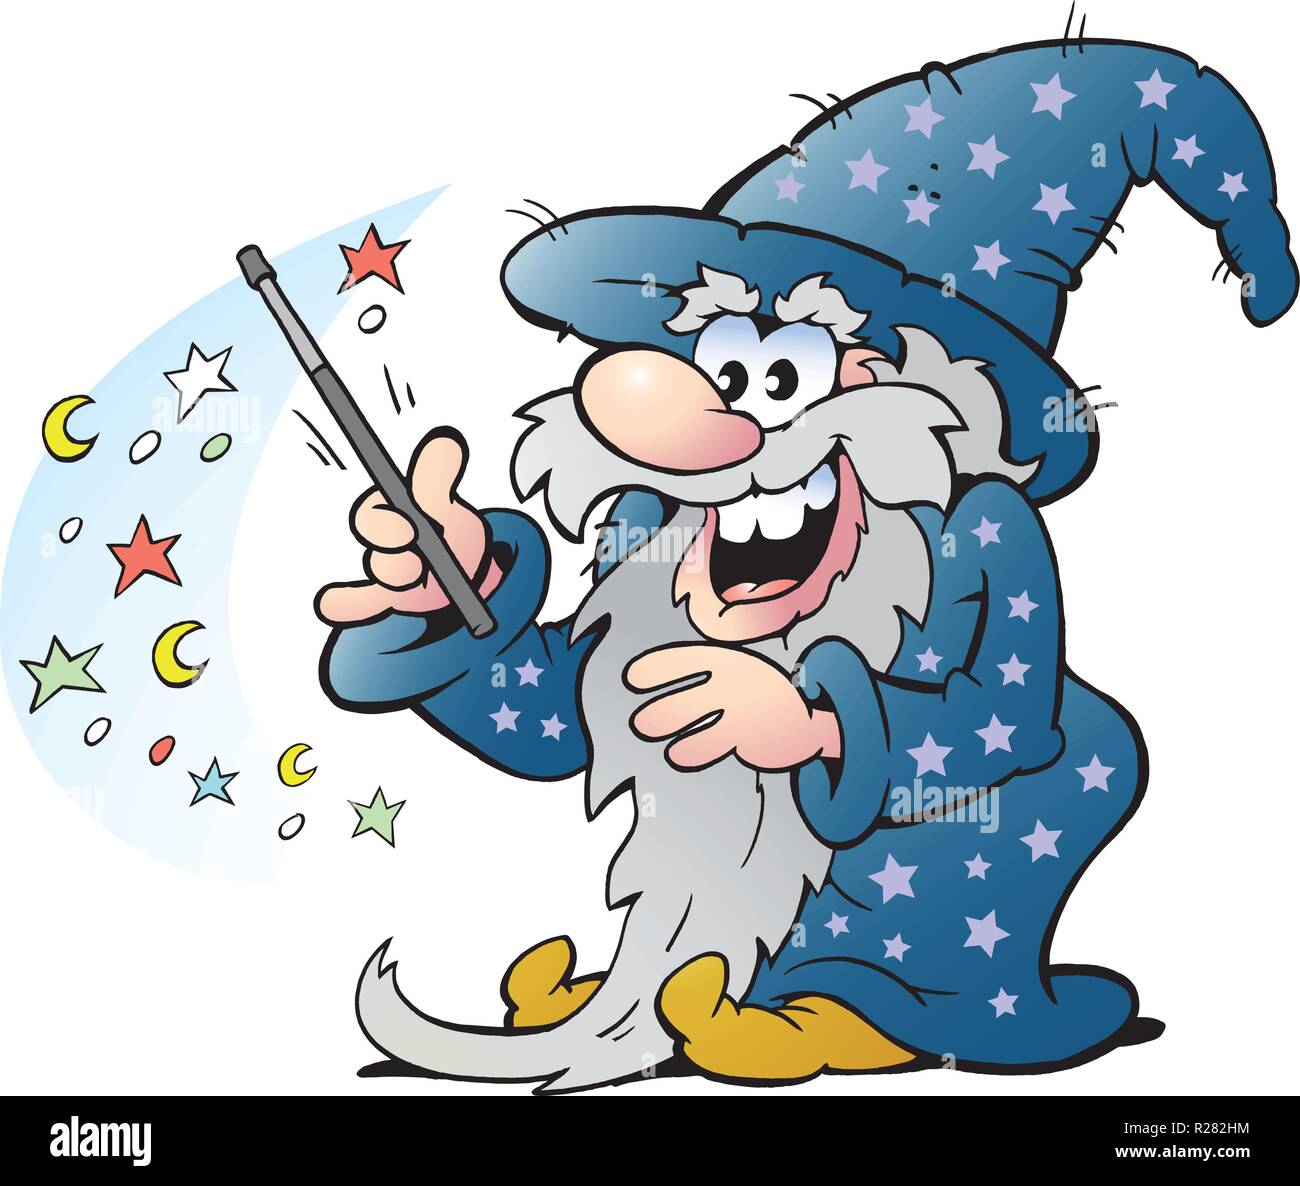 Vector Cartoon Illustration Of A Happy Old Wizard Magic Man Holding A